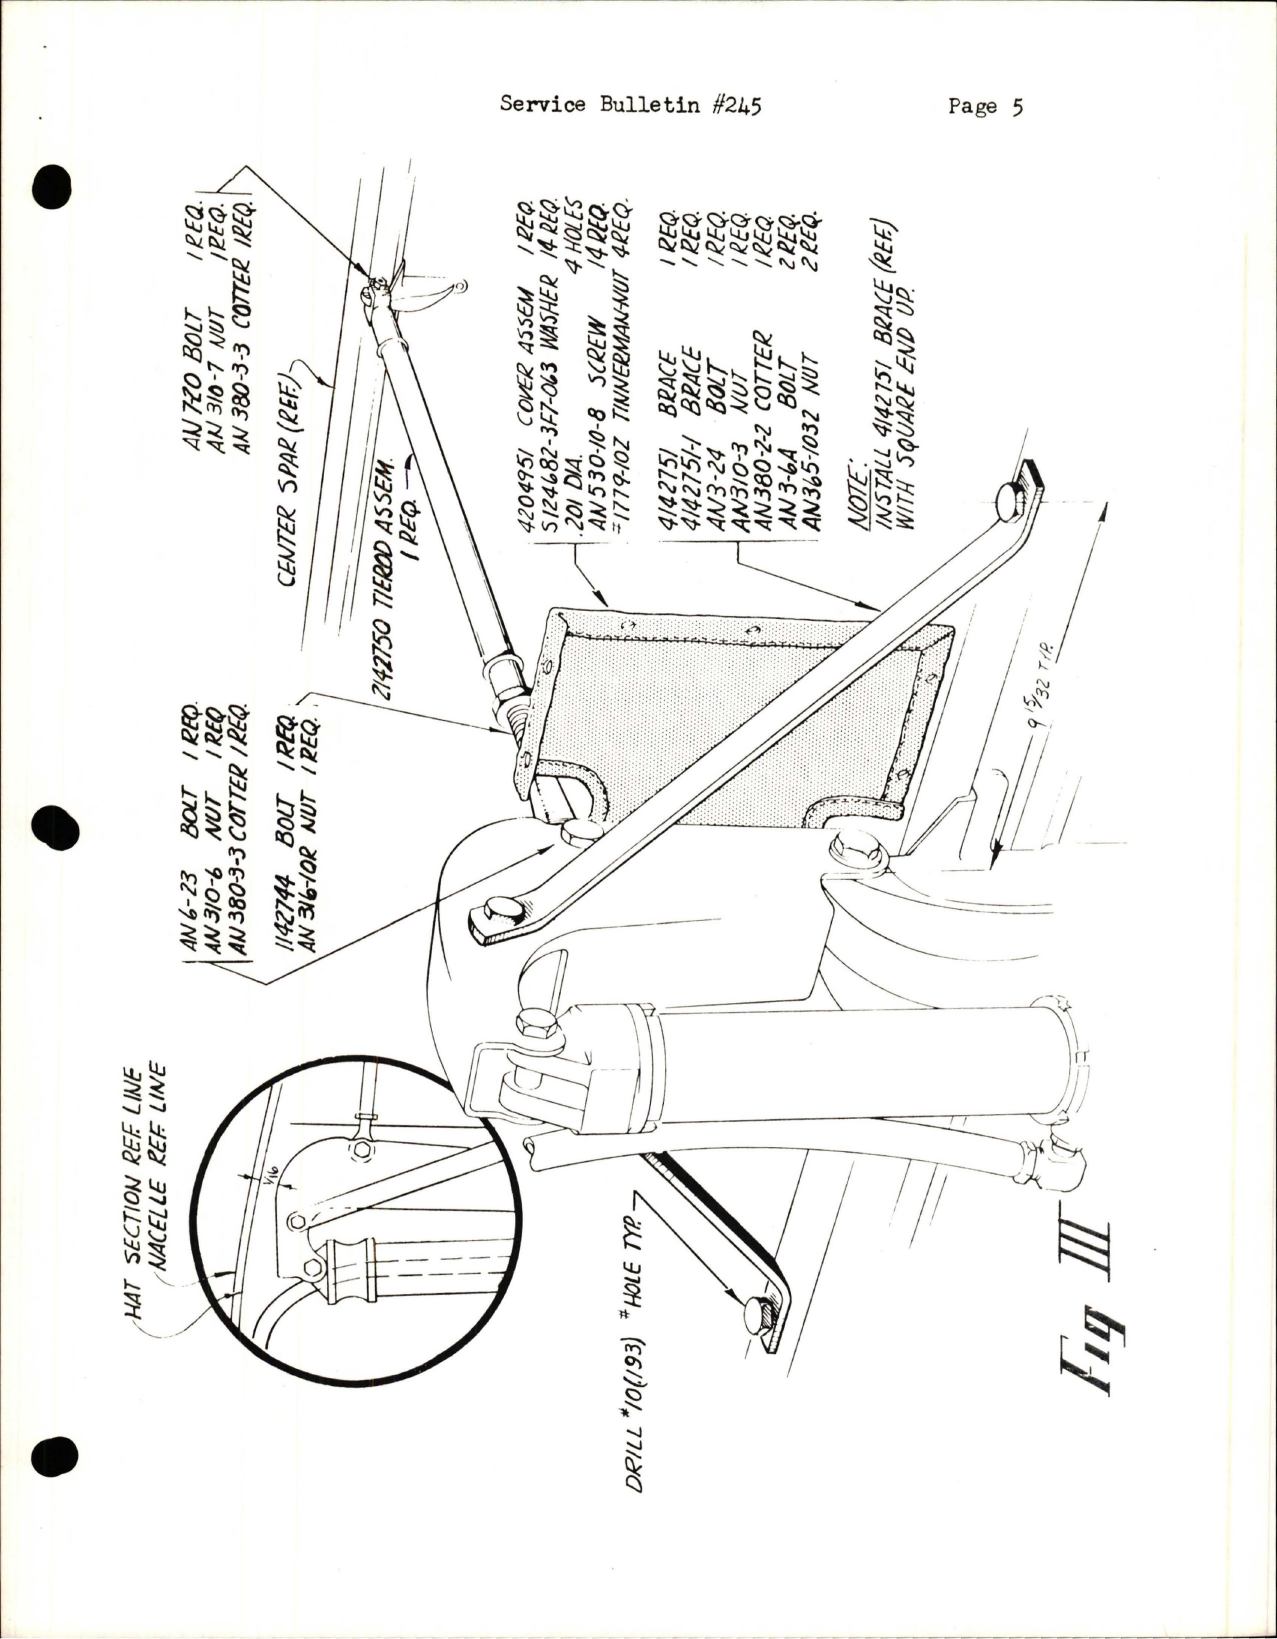 Sample page 5 from AirCorps Library document: Replacement of Main Landing Gear Rubber Bungee to Hydraulic Compensator